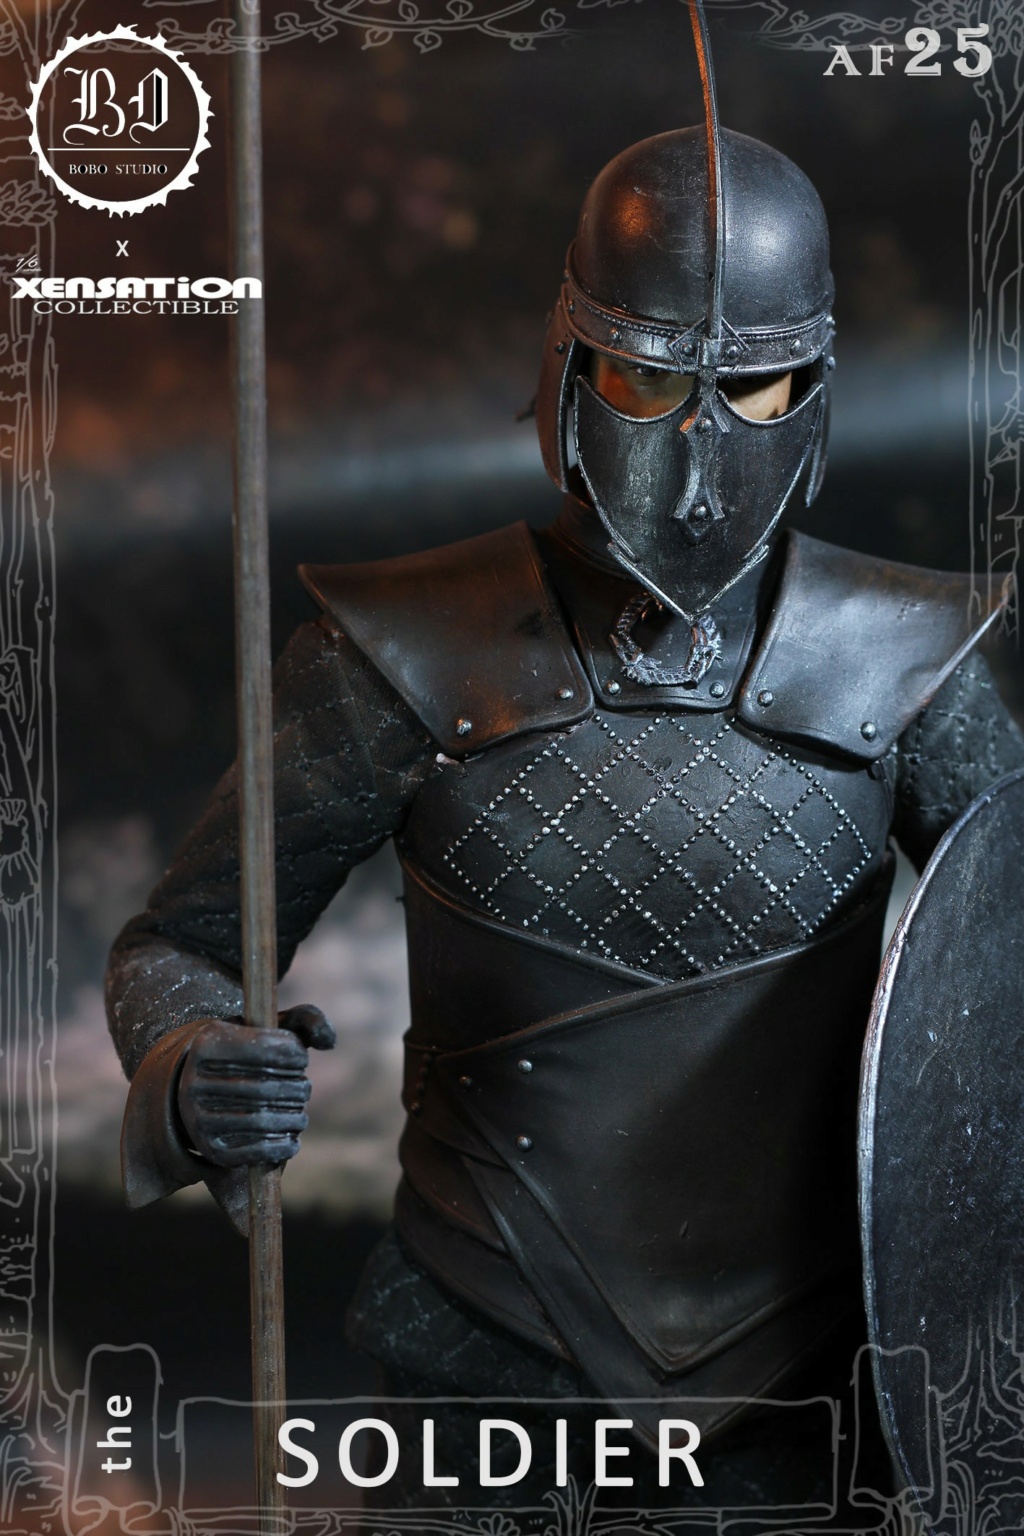 Fantasy - NEW PRODUCT: Xensation Collectible & BoBo Studio: 1/6 Grey Worm Soldier Collectible Doll AF25 16134710